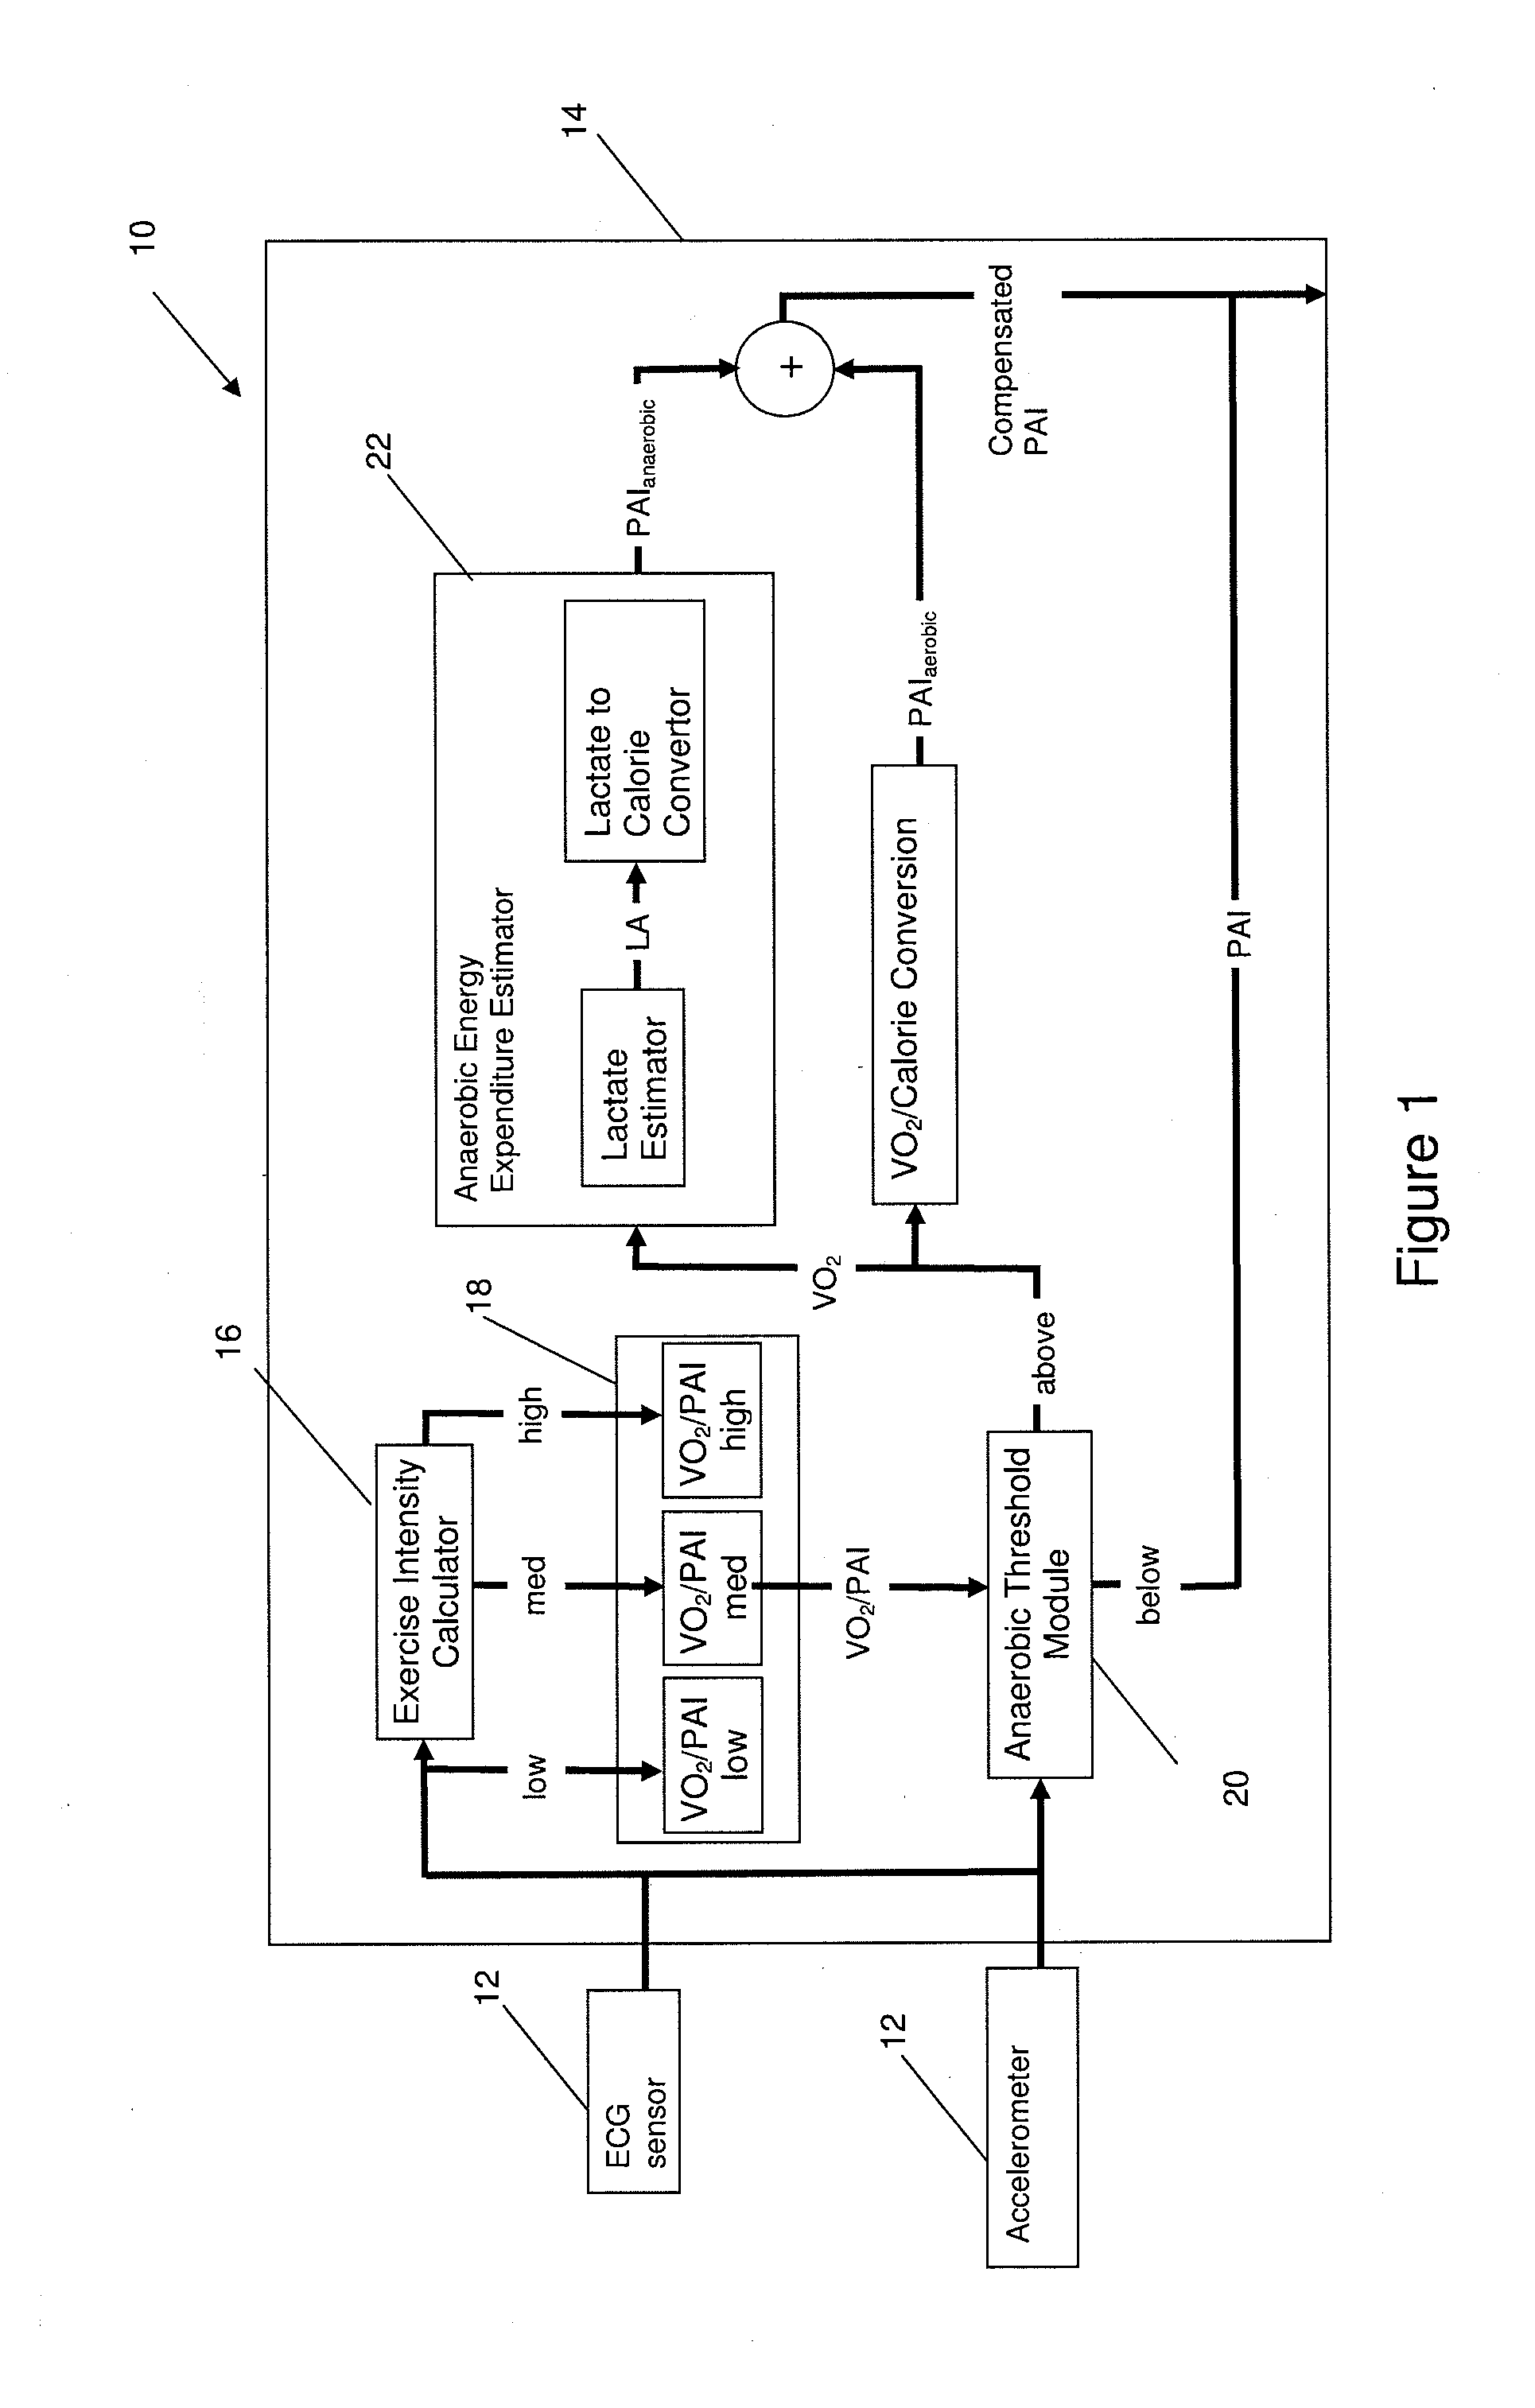 Device and method for estimating energy expenditure during exercise